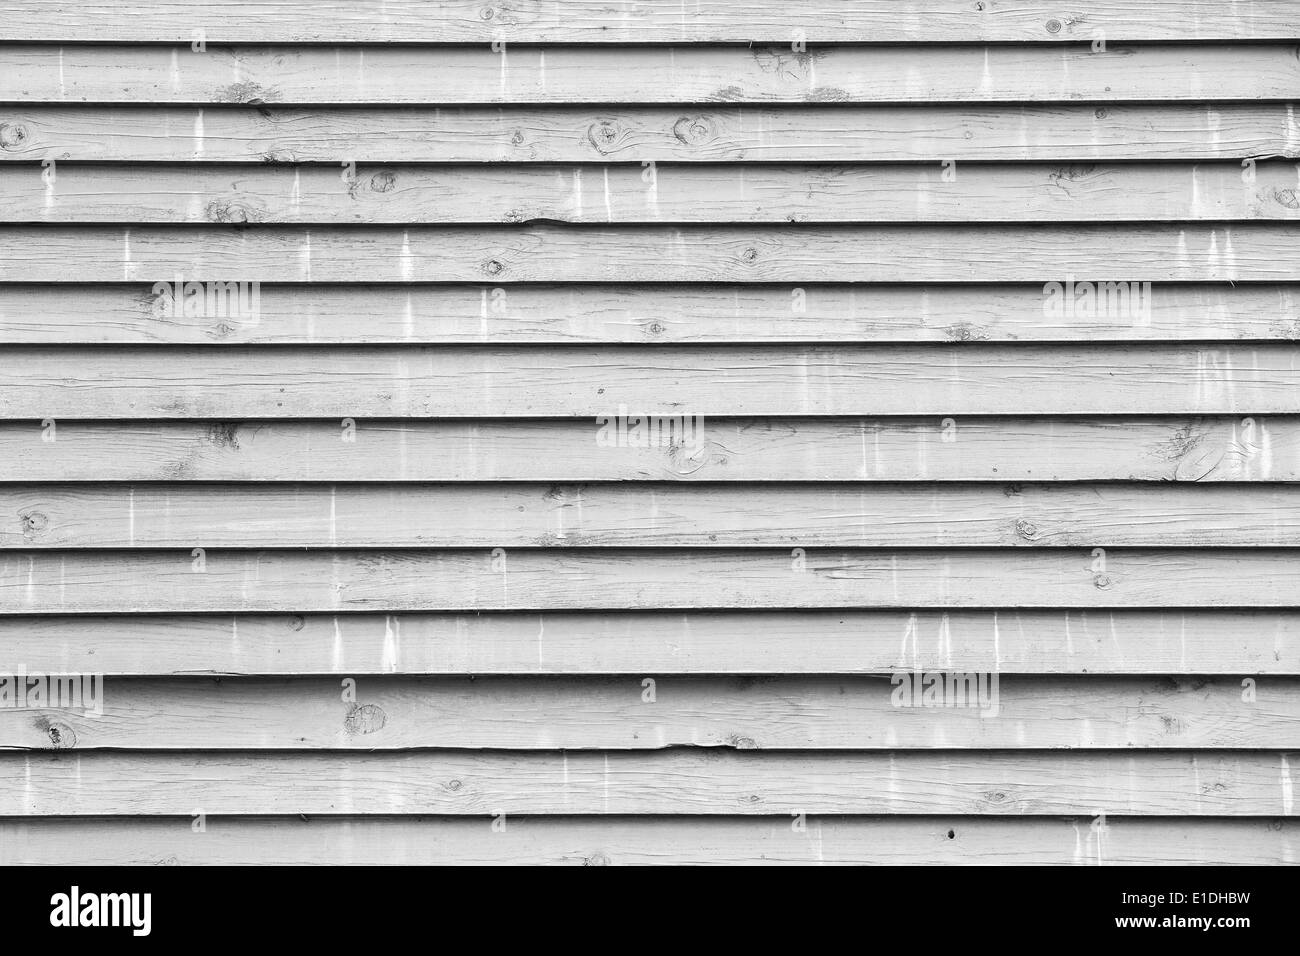 Old white wooden wall background photo texture Stock Photo